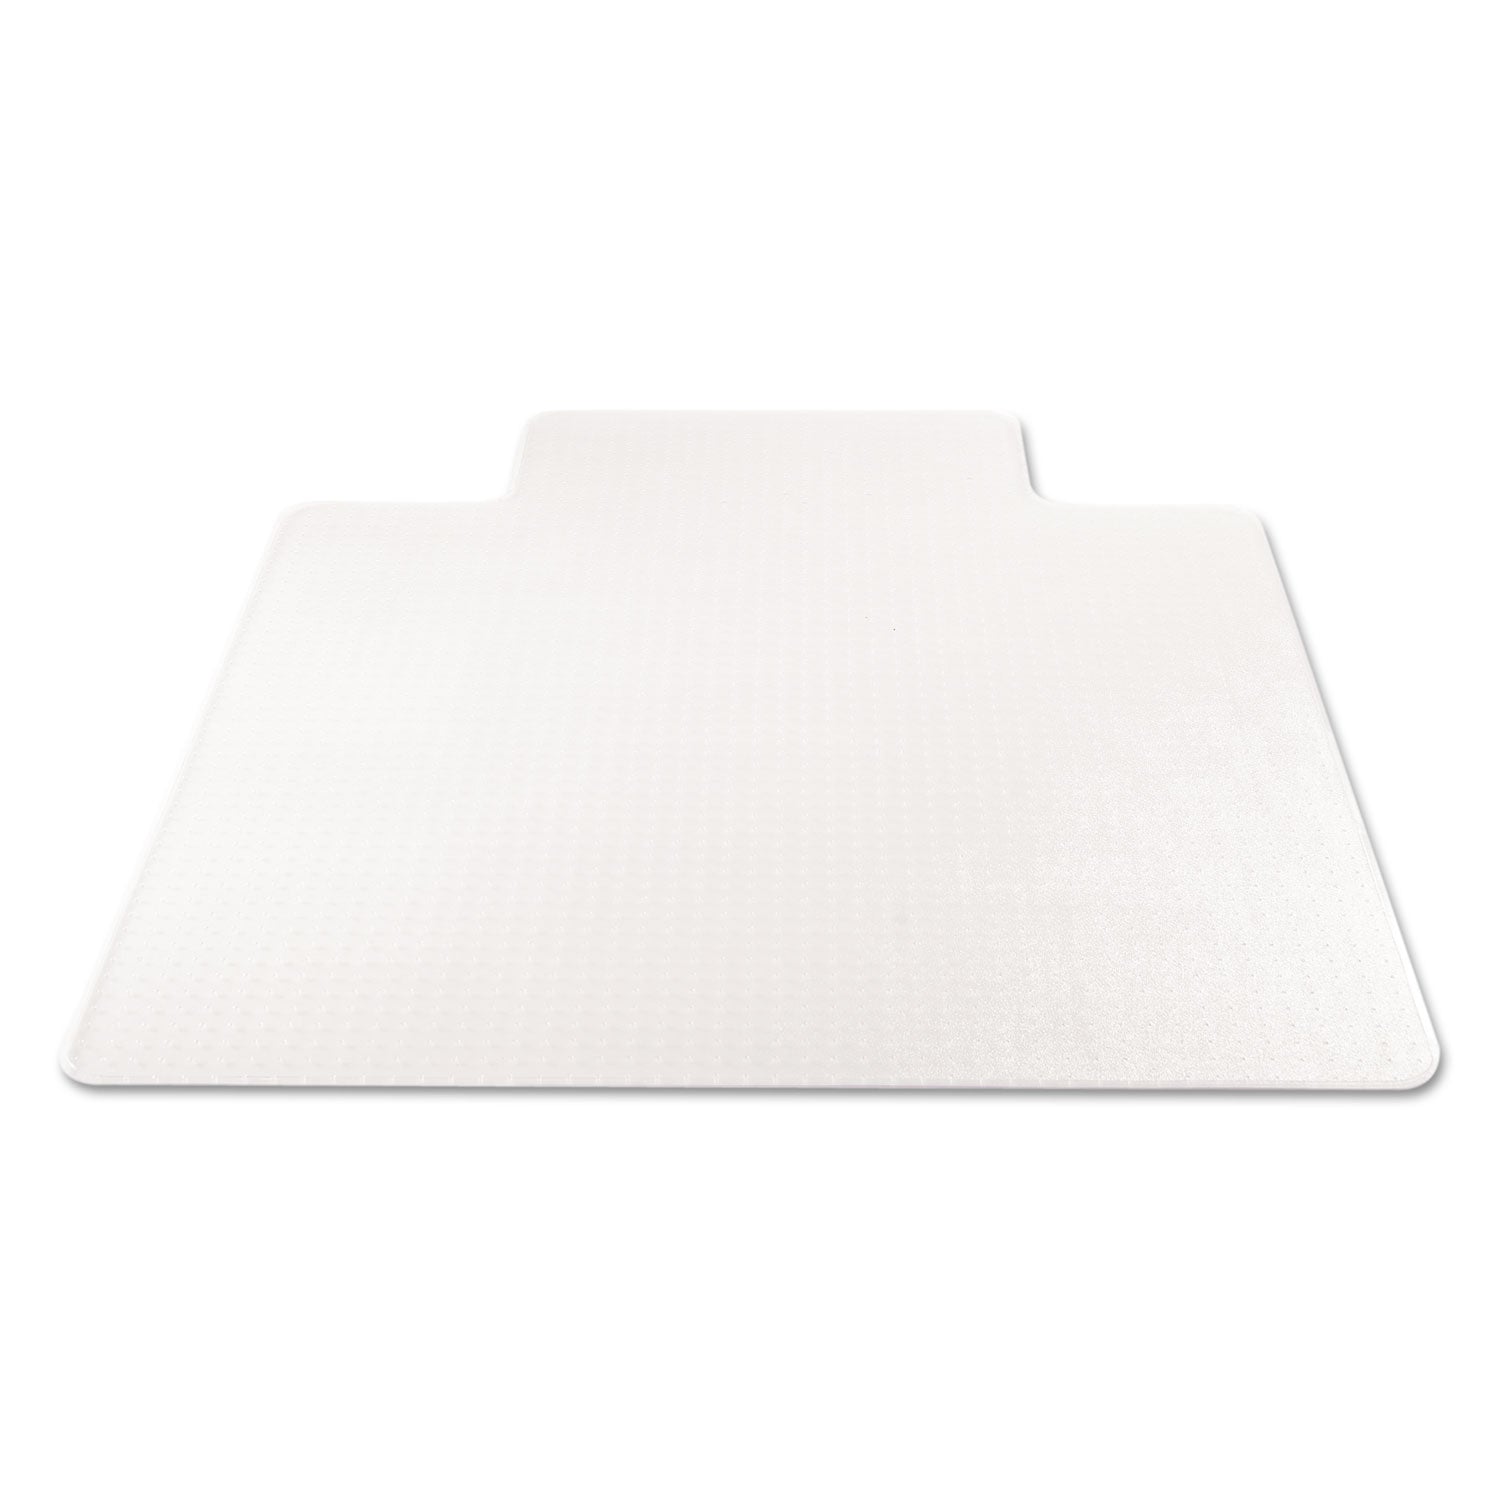 SuperMat Frequent Use Chair Mat, Med Pile Carpet, Flat, 36 x 48, Lipped, Clear - 